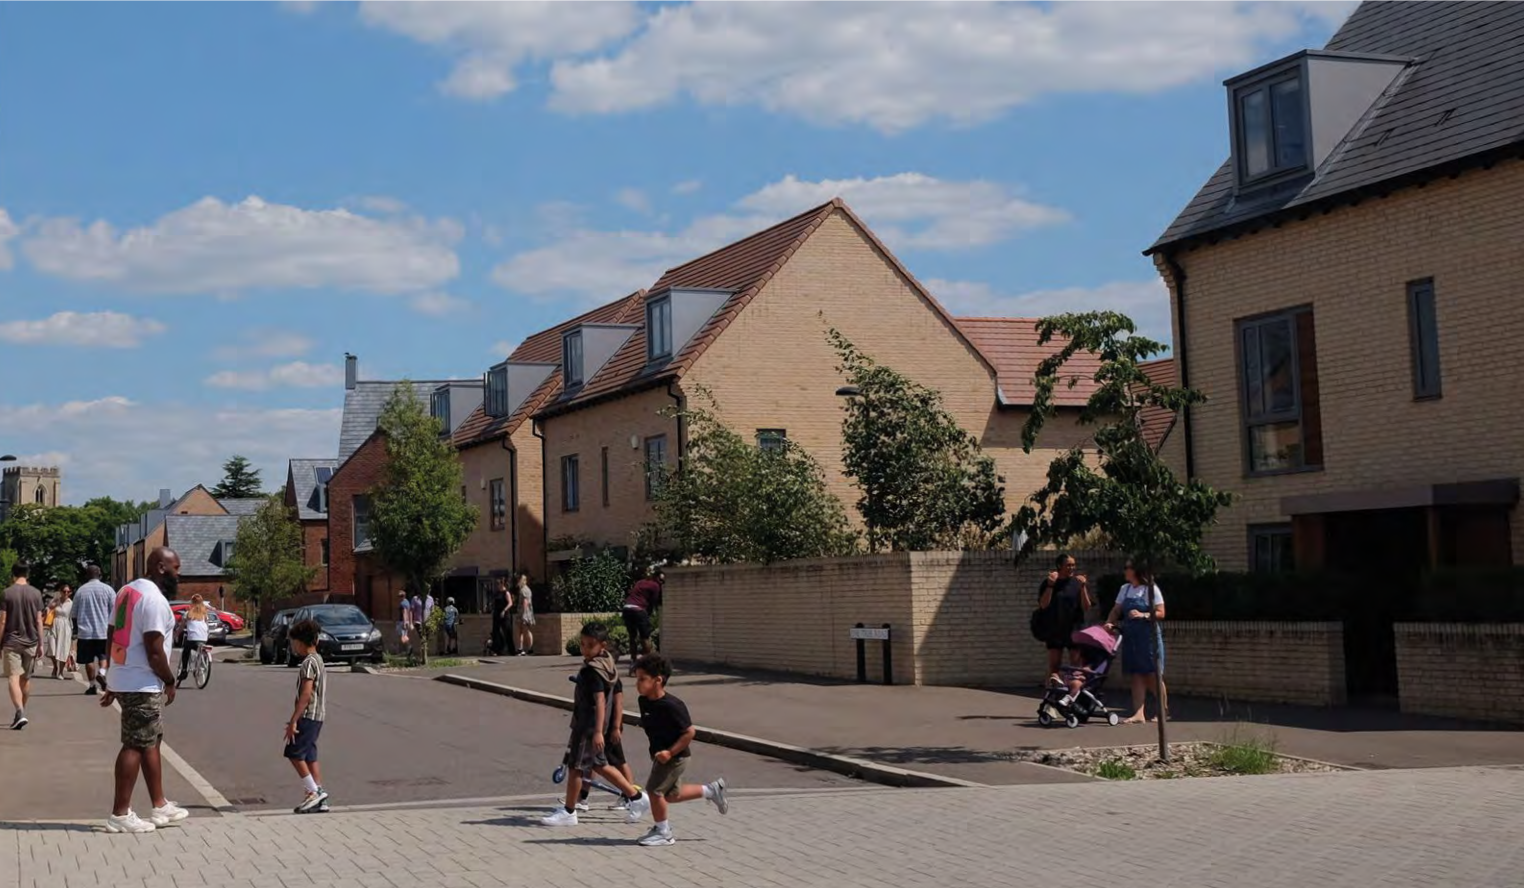 Design South East – Using Building for a Healthy Life